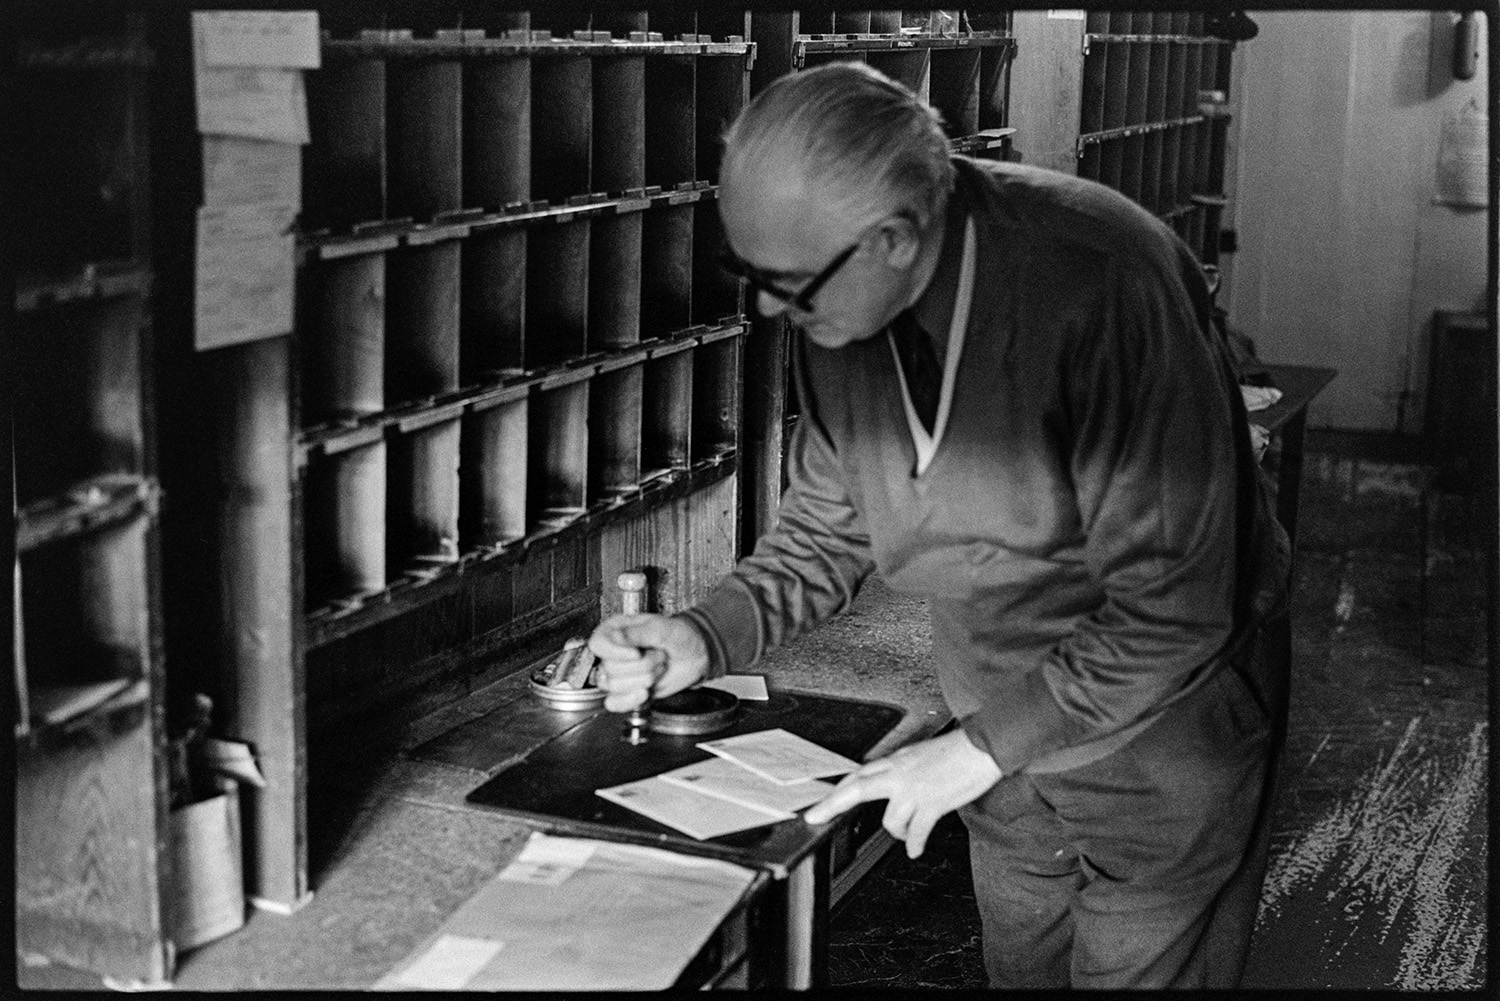 Sorting mail in sorting office. Franking mail. 
[Mr Butler franking mail using a stamp, by pigeon holes at Winkleigh Post Office.]